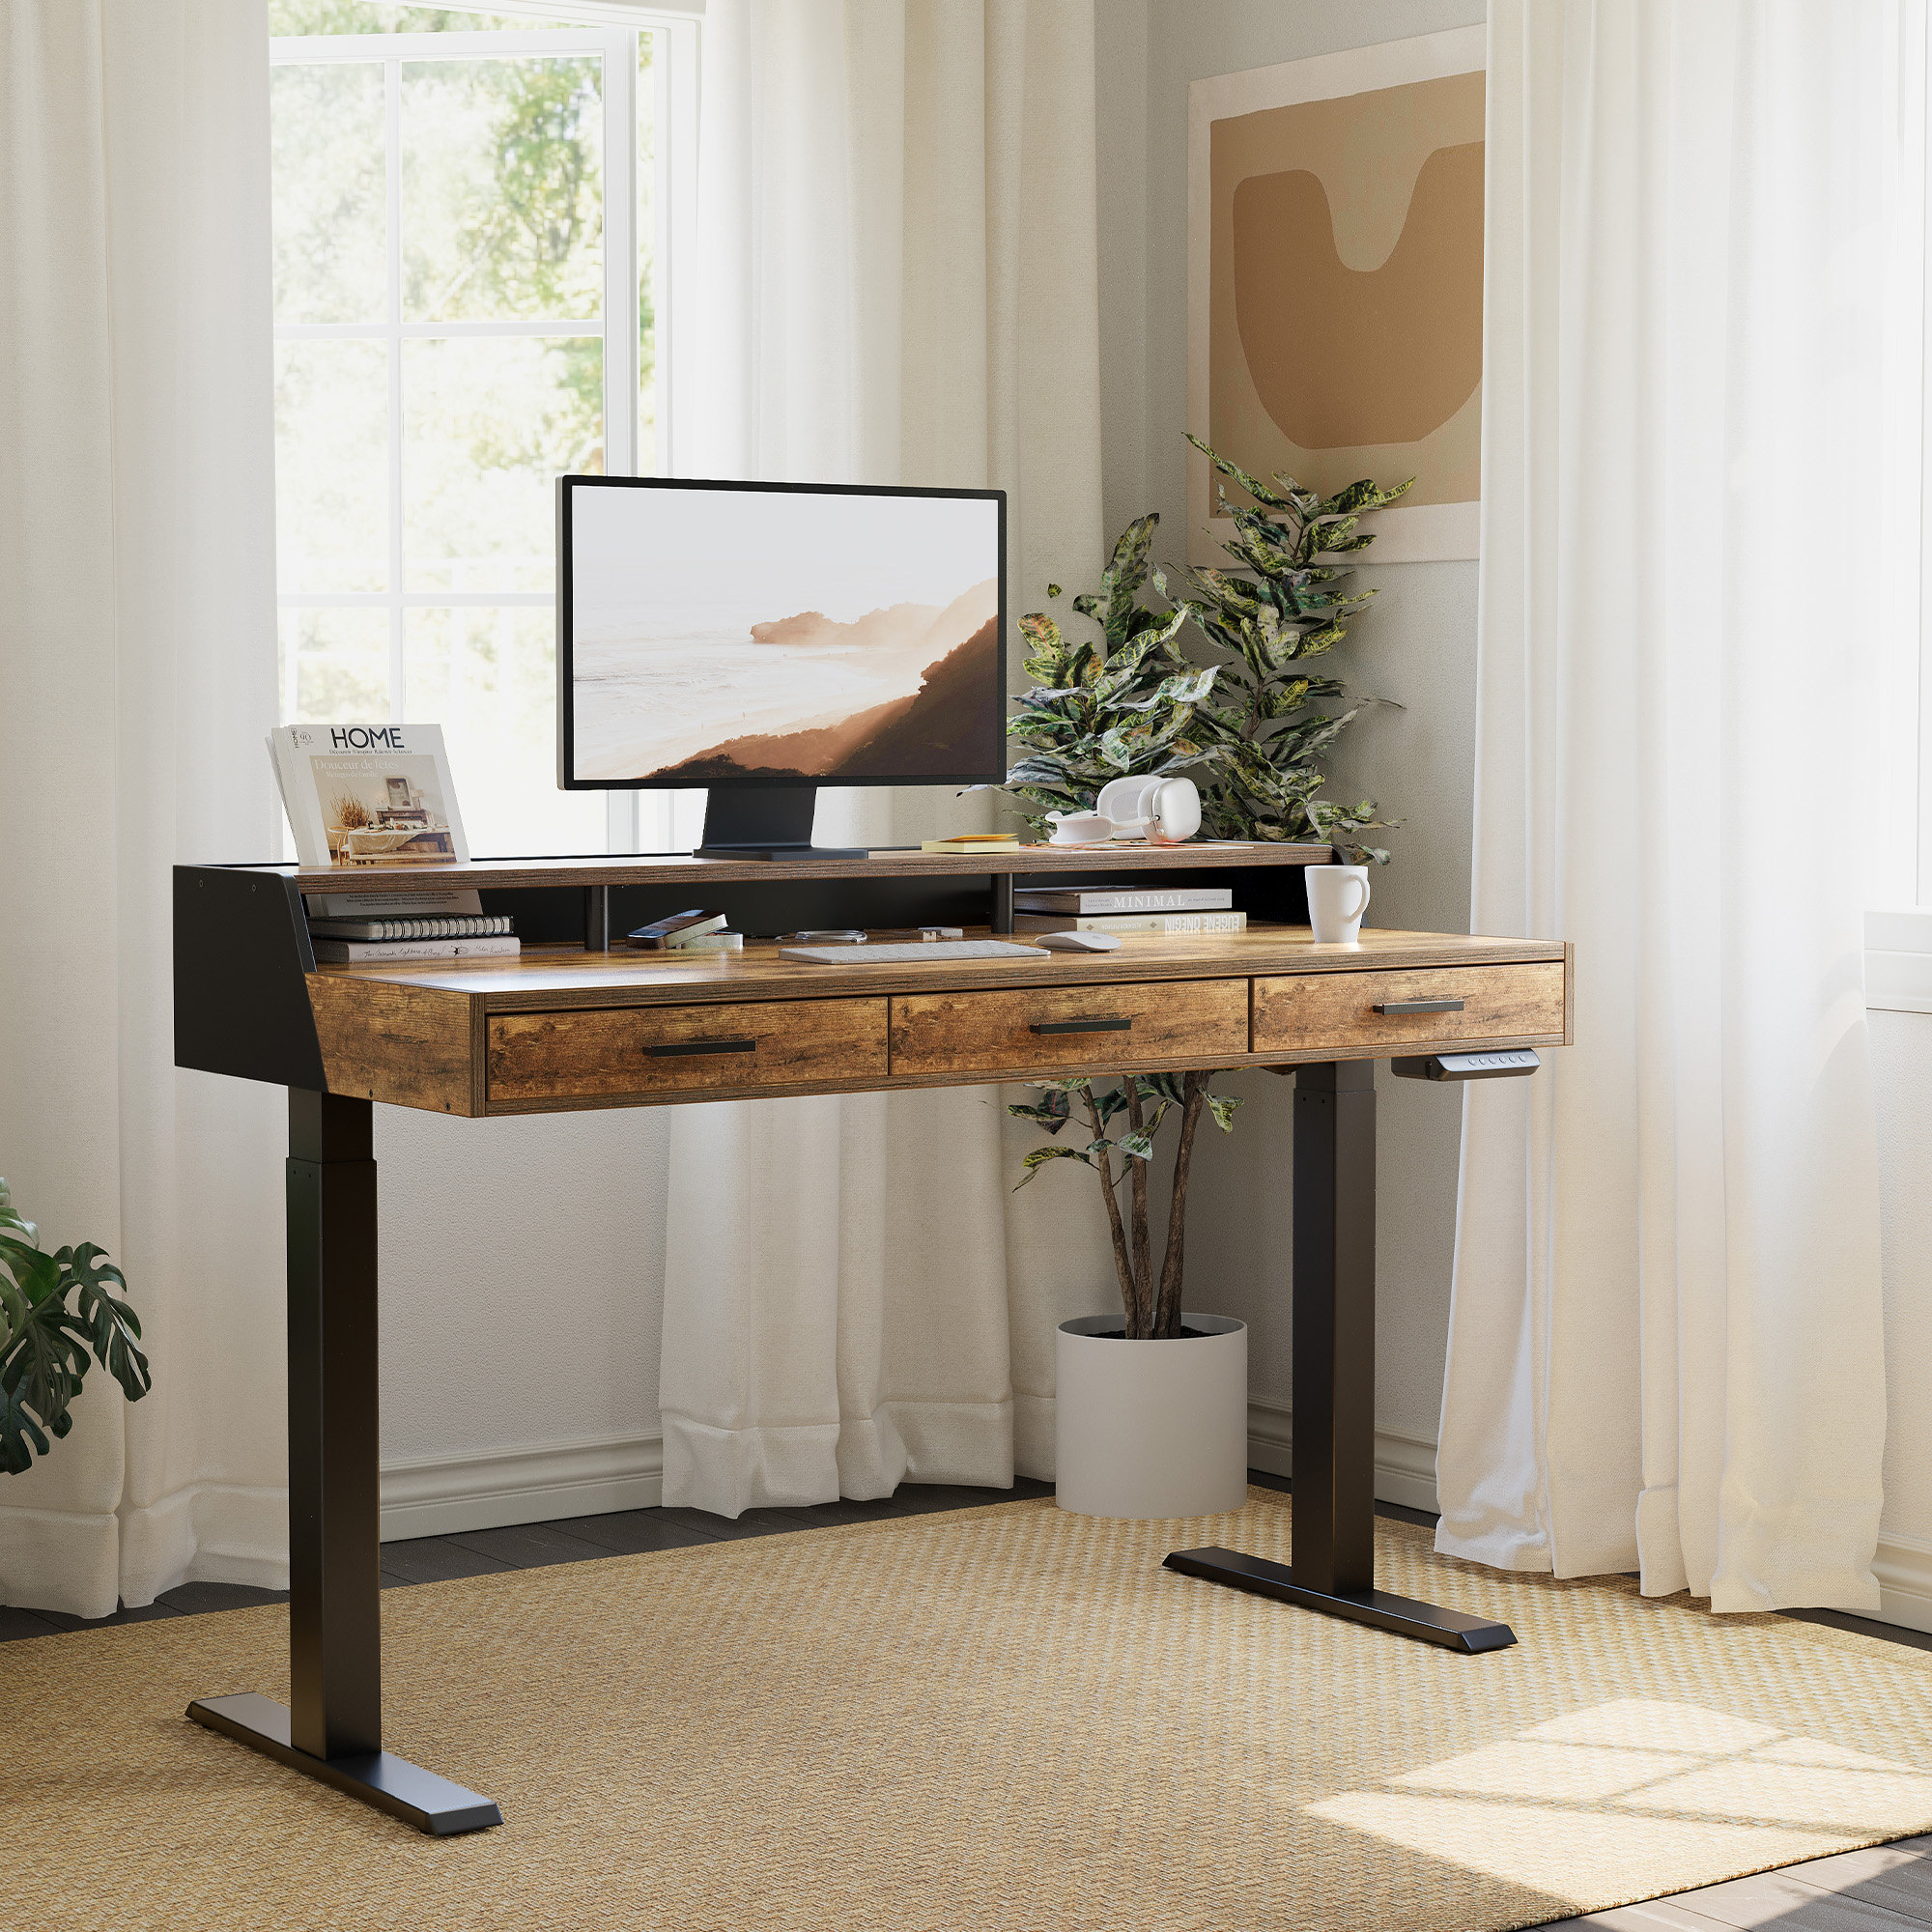 Walnut Desk Shelf & Monitor Stand Desk and Home Organisation Home Office  Storage and Wood Desk Accessories 